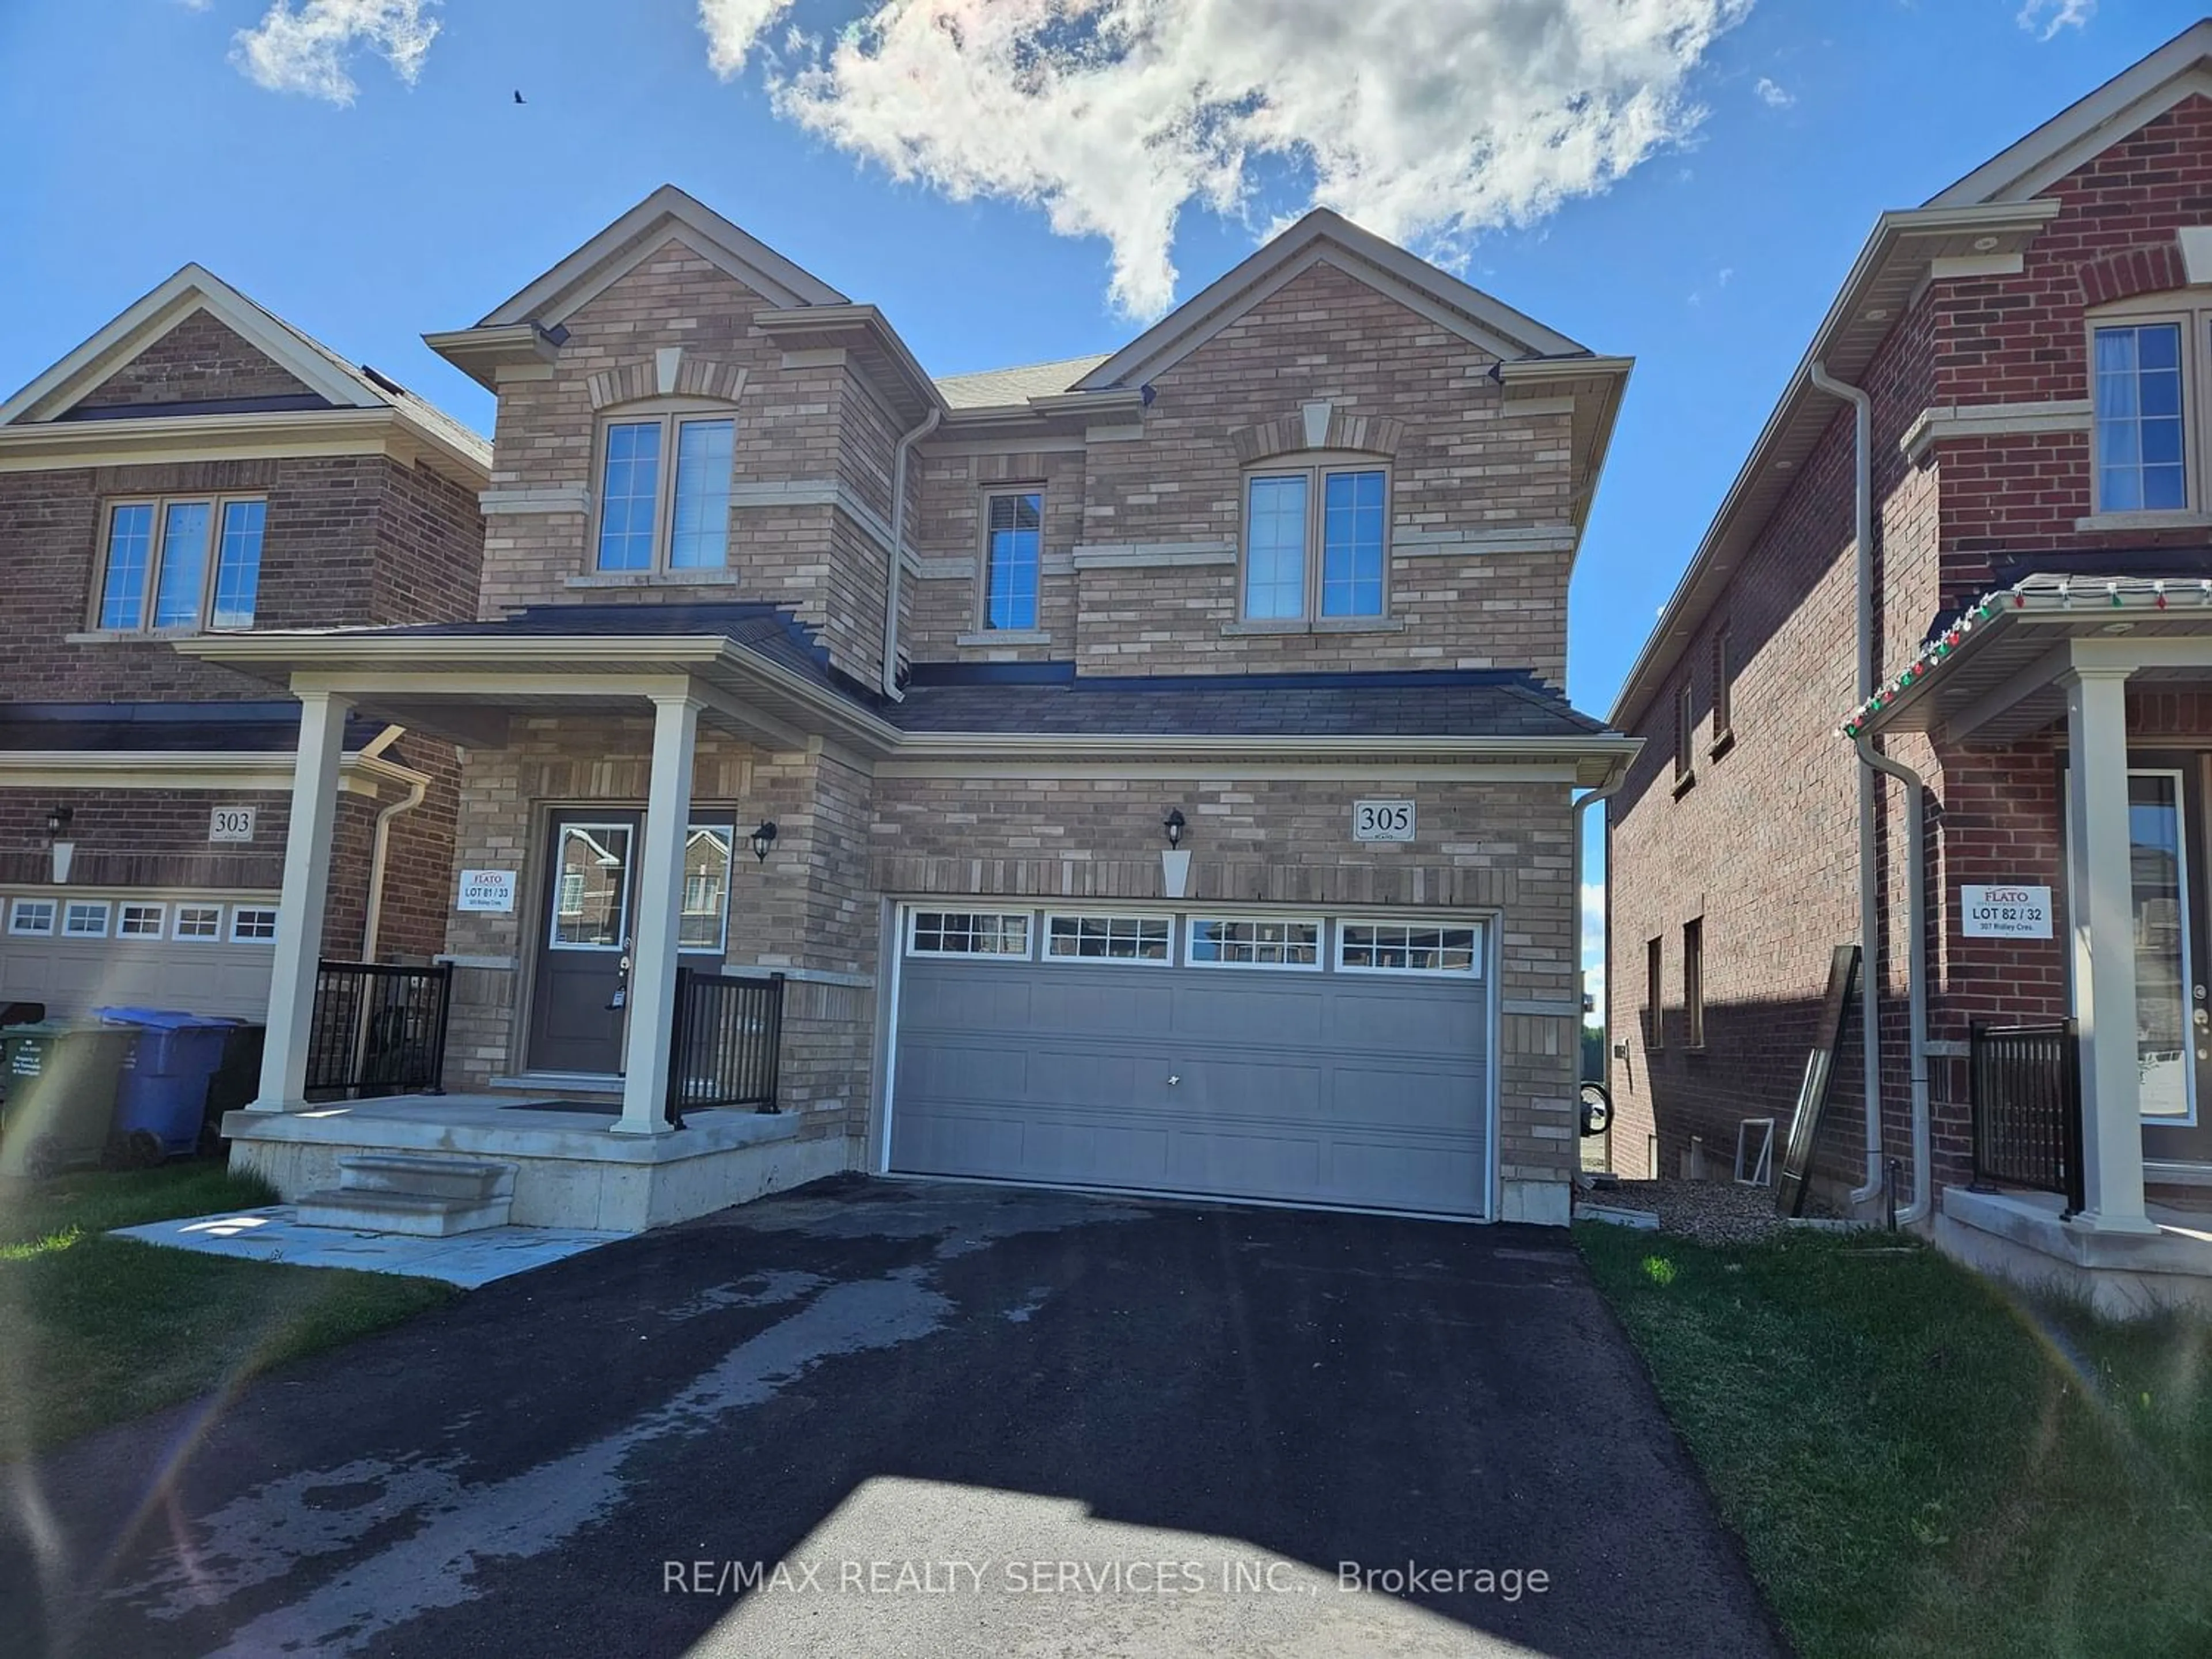 Home with brick exterior material for 305 Ridley Cres, Southgate Ontario N0C 1B0